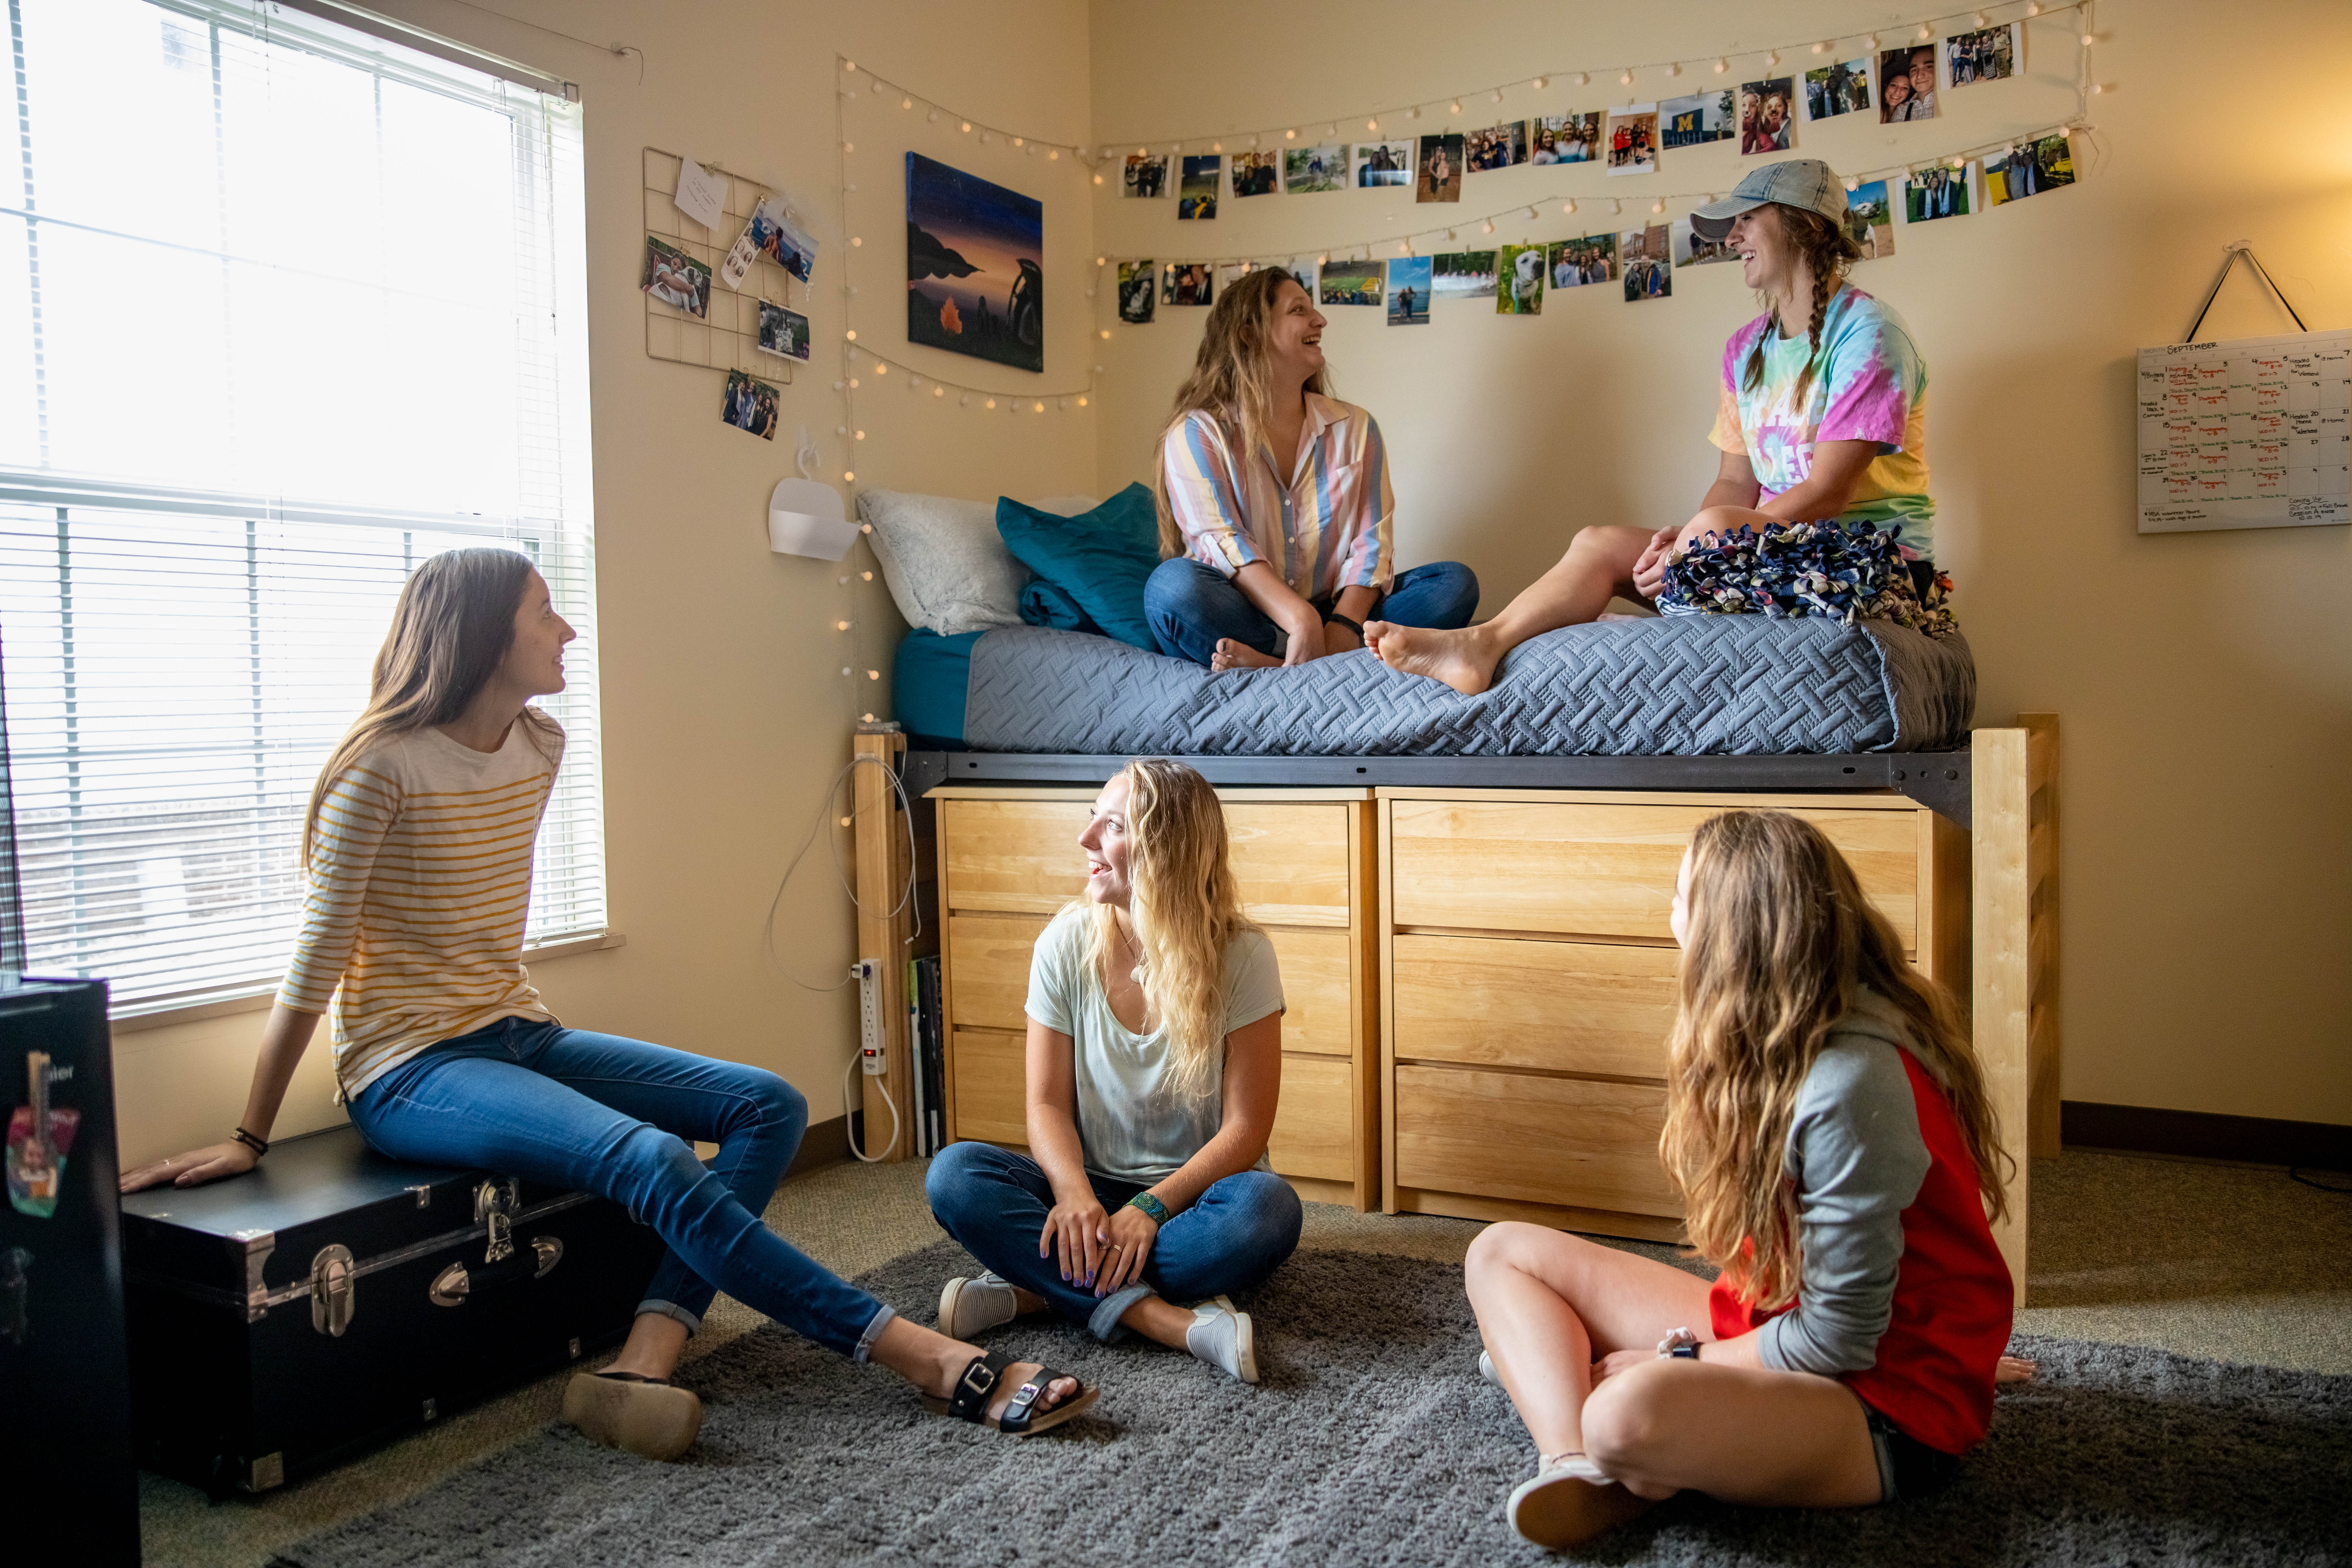 Which Dorm Has the Most Sorority Girls at SDSU? - DormInfo